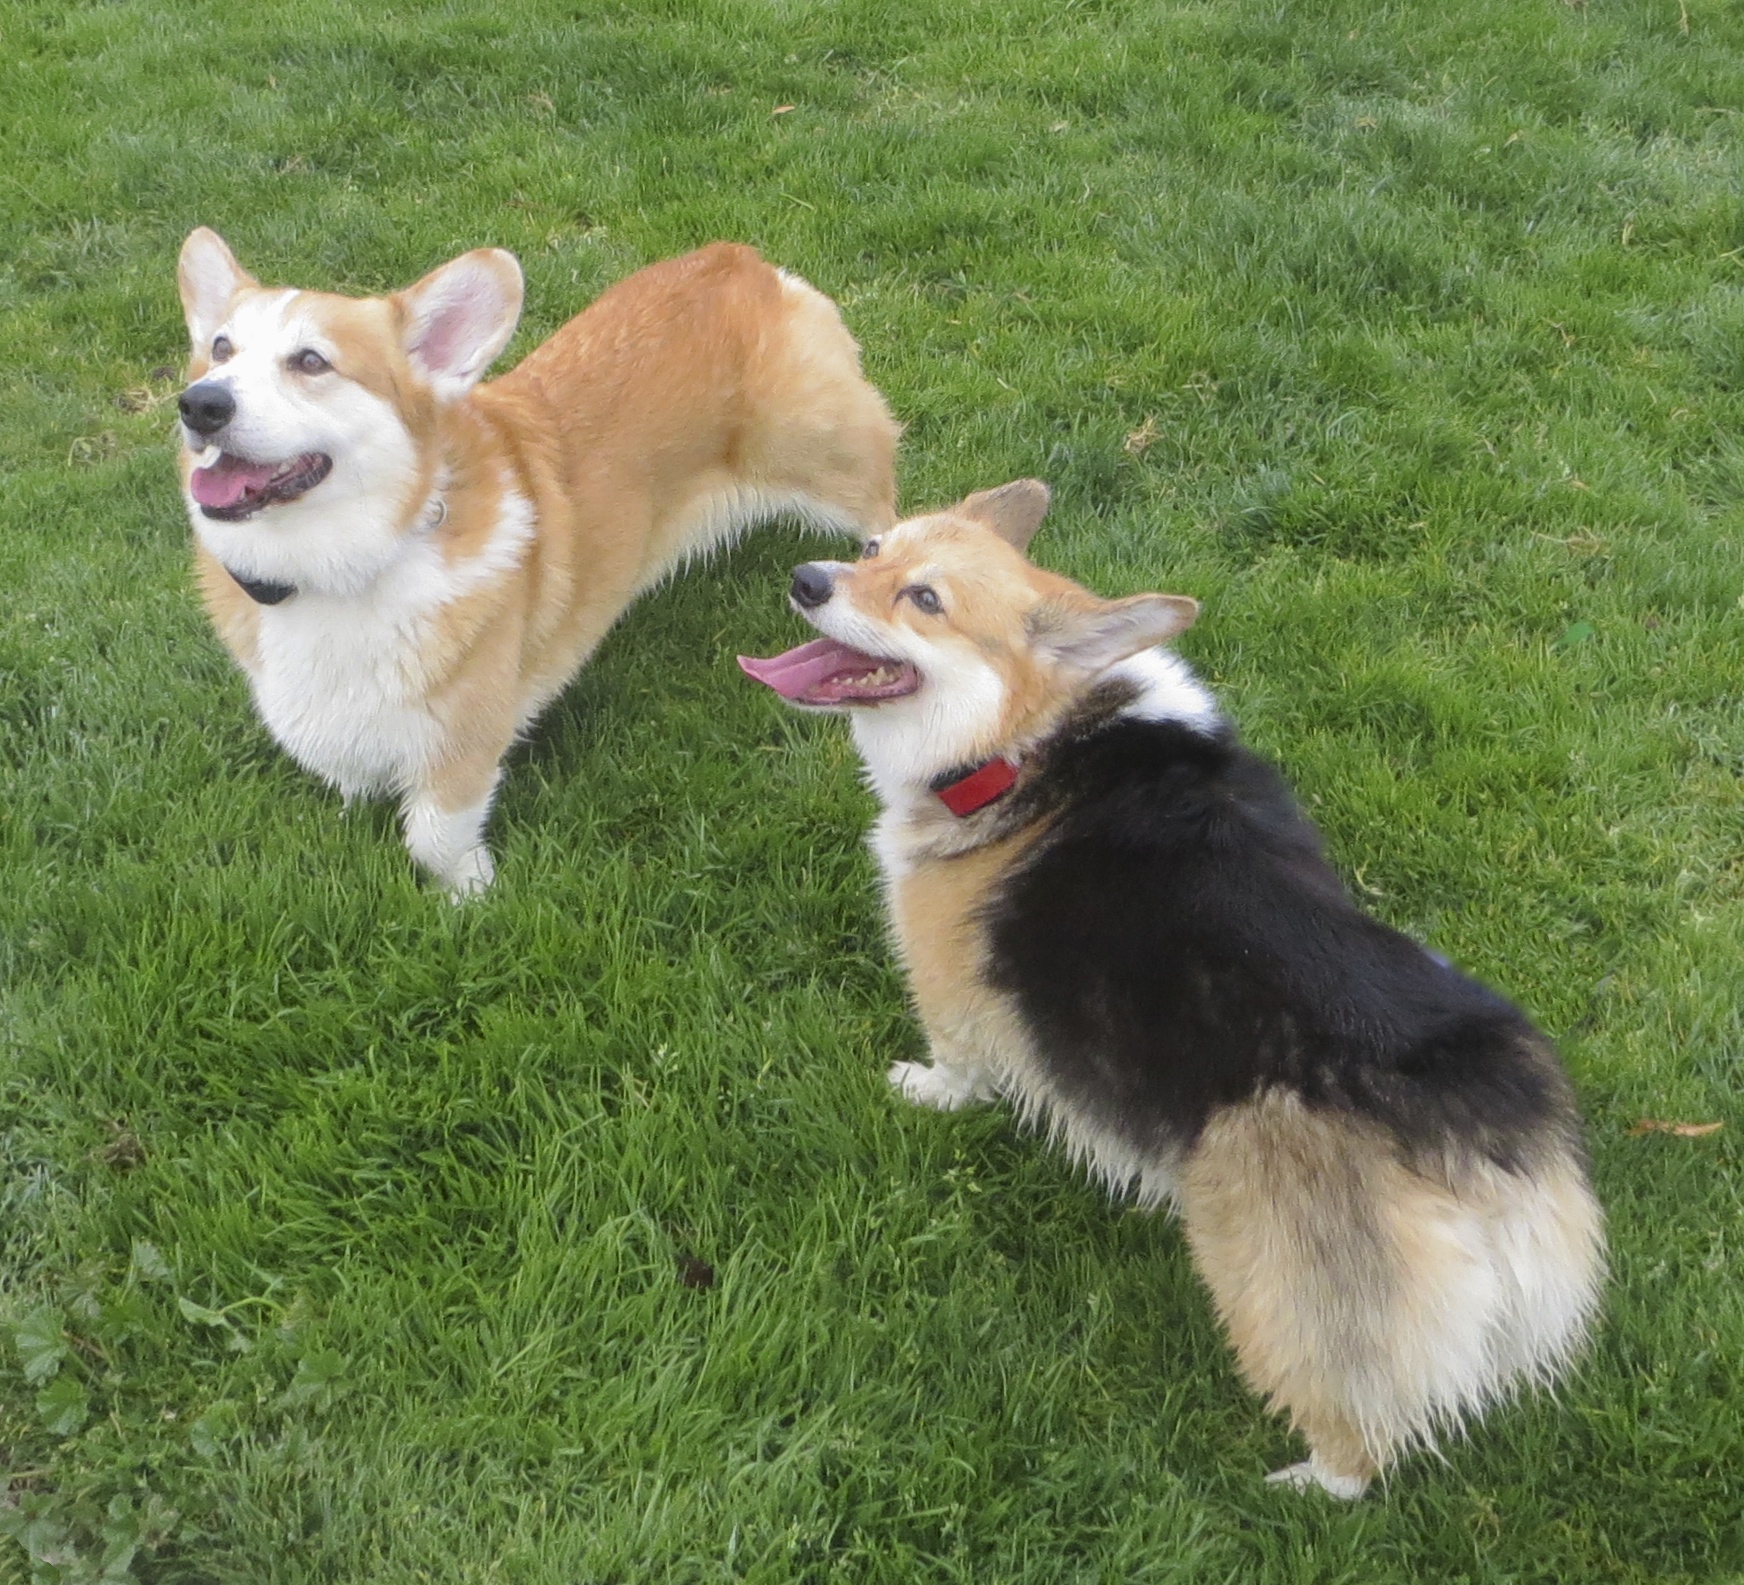 Two Wet Pembroke Welsh Corgis, one Red and One Tricolor